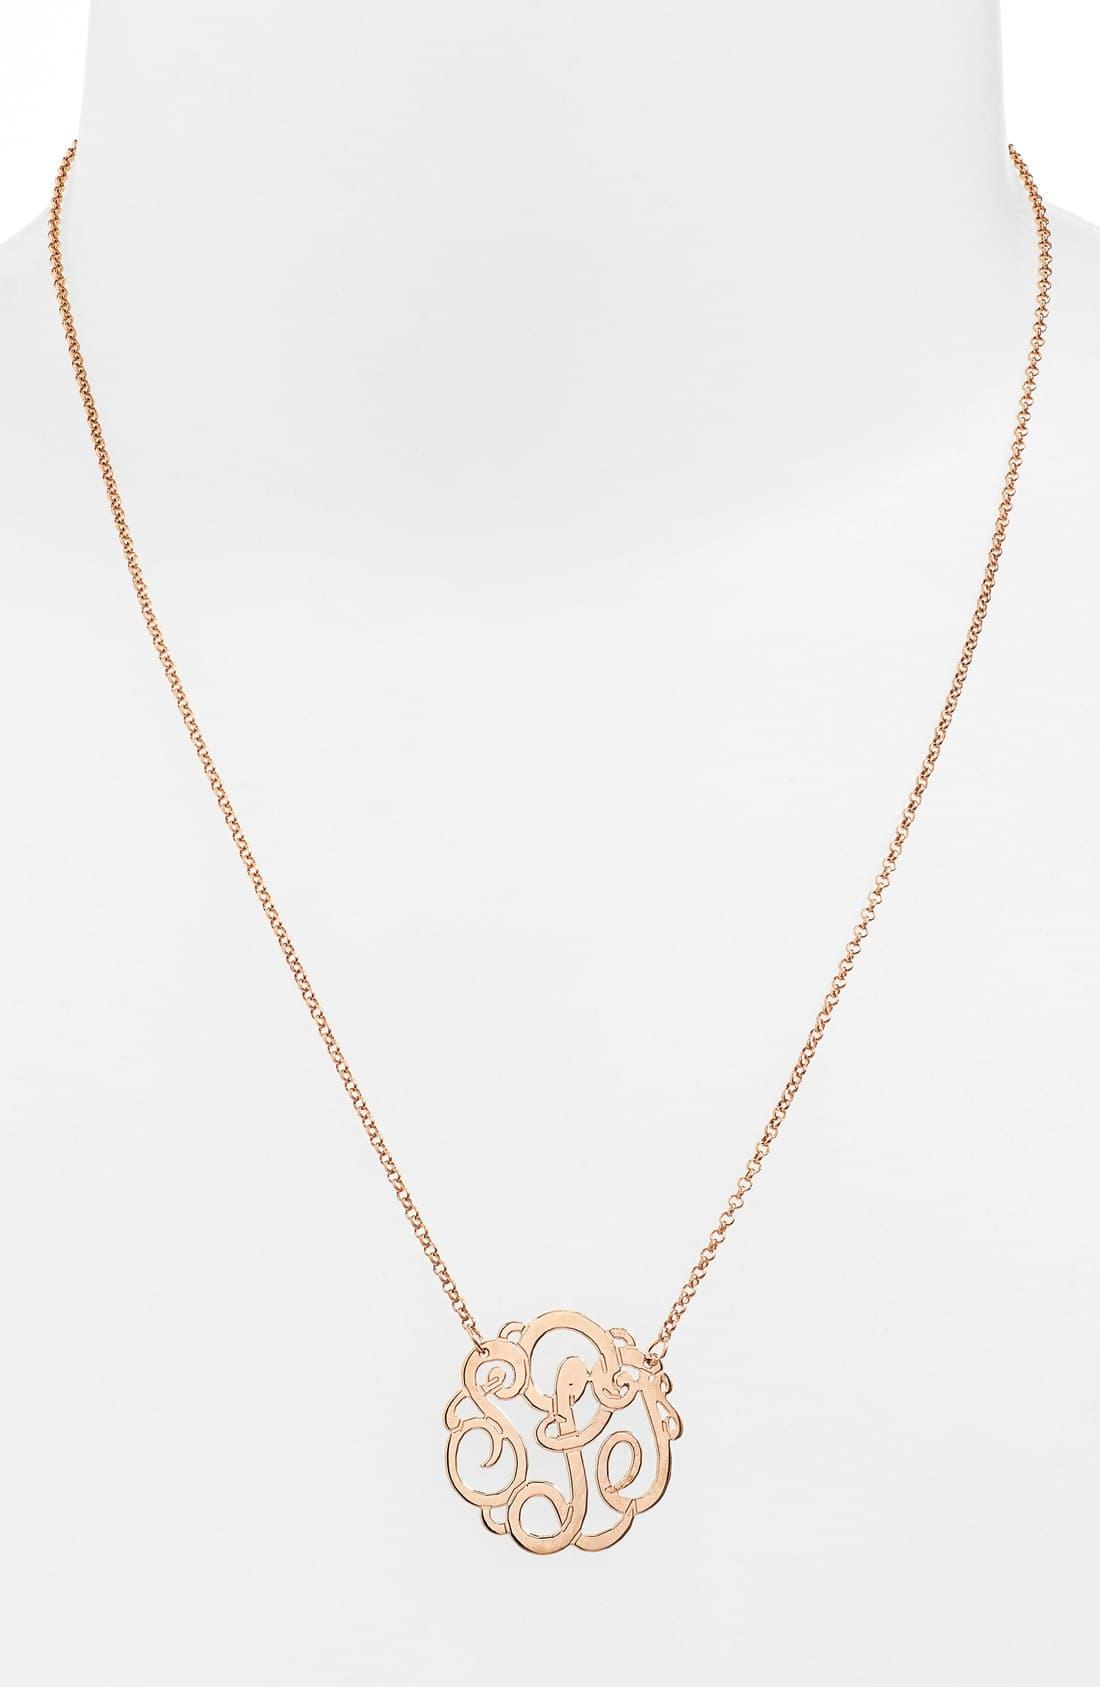 Argento Vivo Personalized Small 3-initial Letter Monogram Necklace (nordstrom Exclusive) in Rose ...